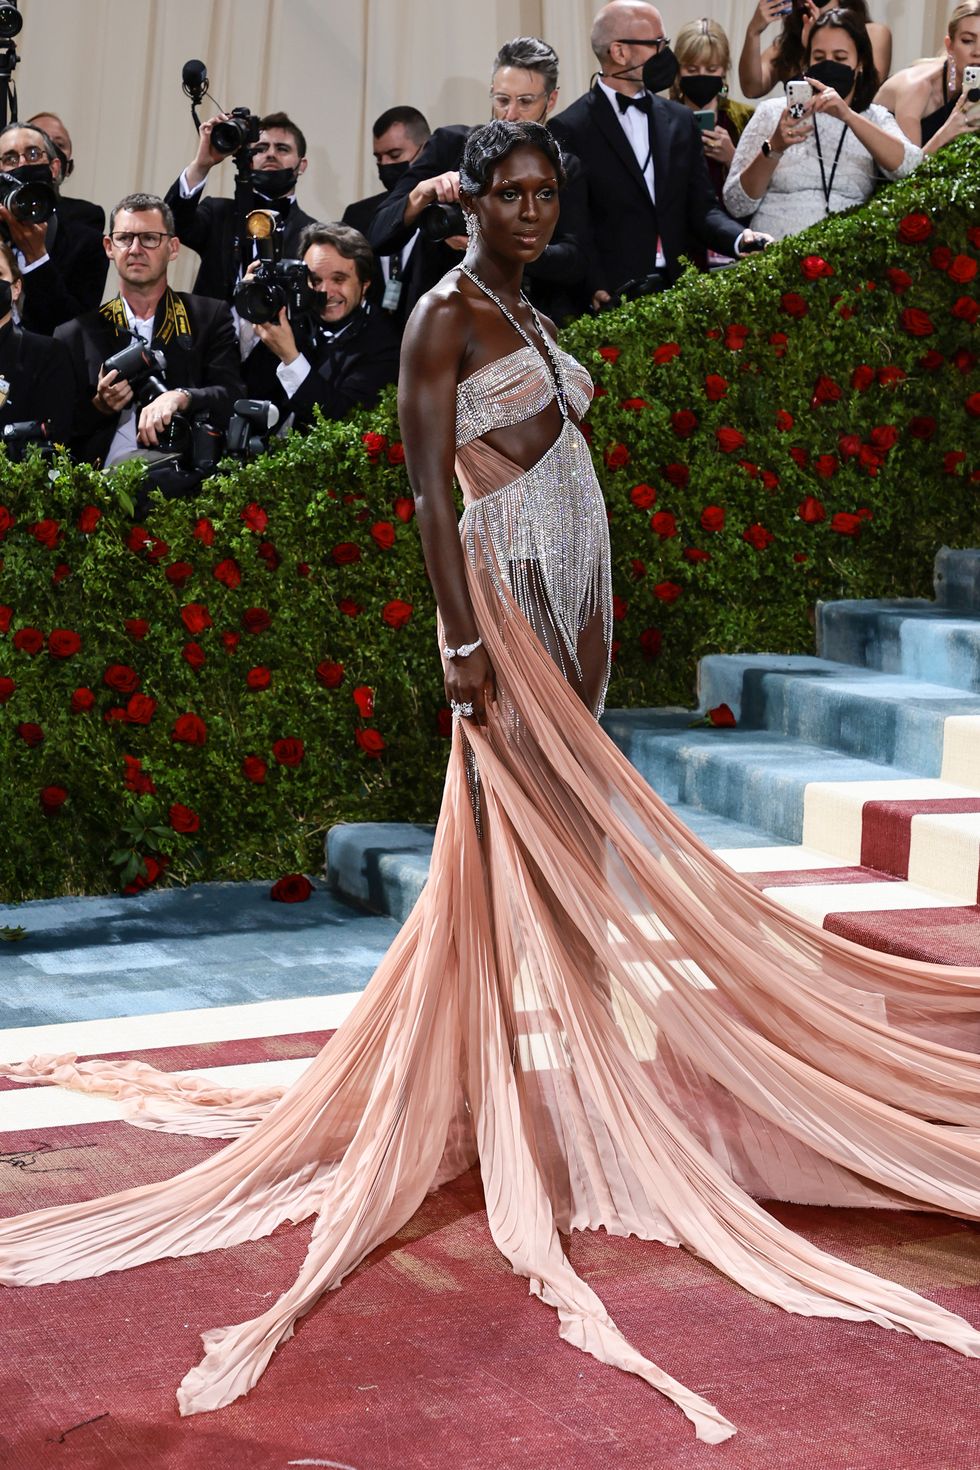 The 10 best dressed from the Met Gala 2022